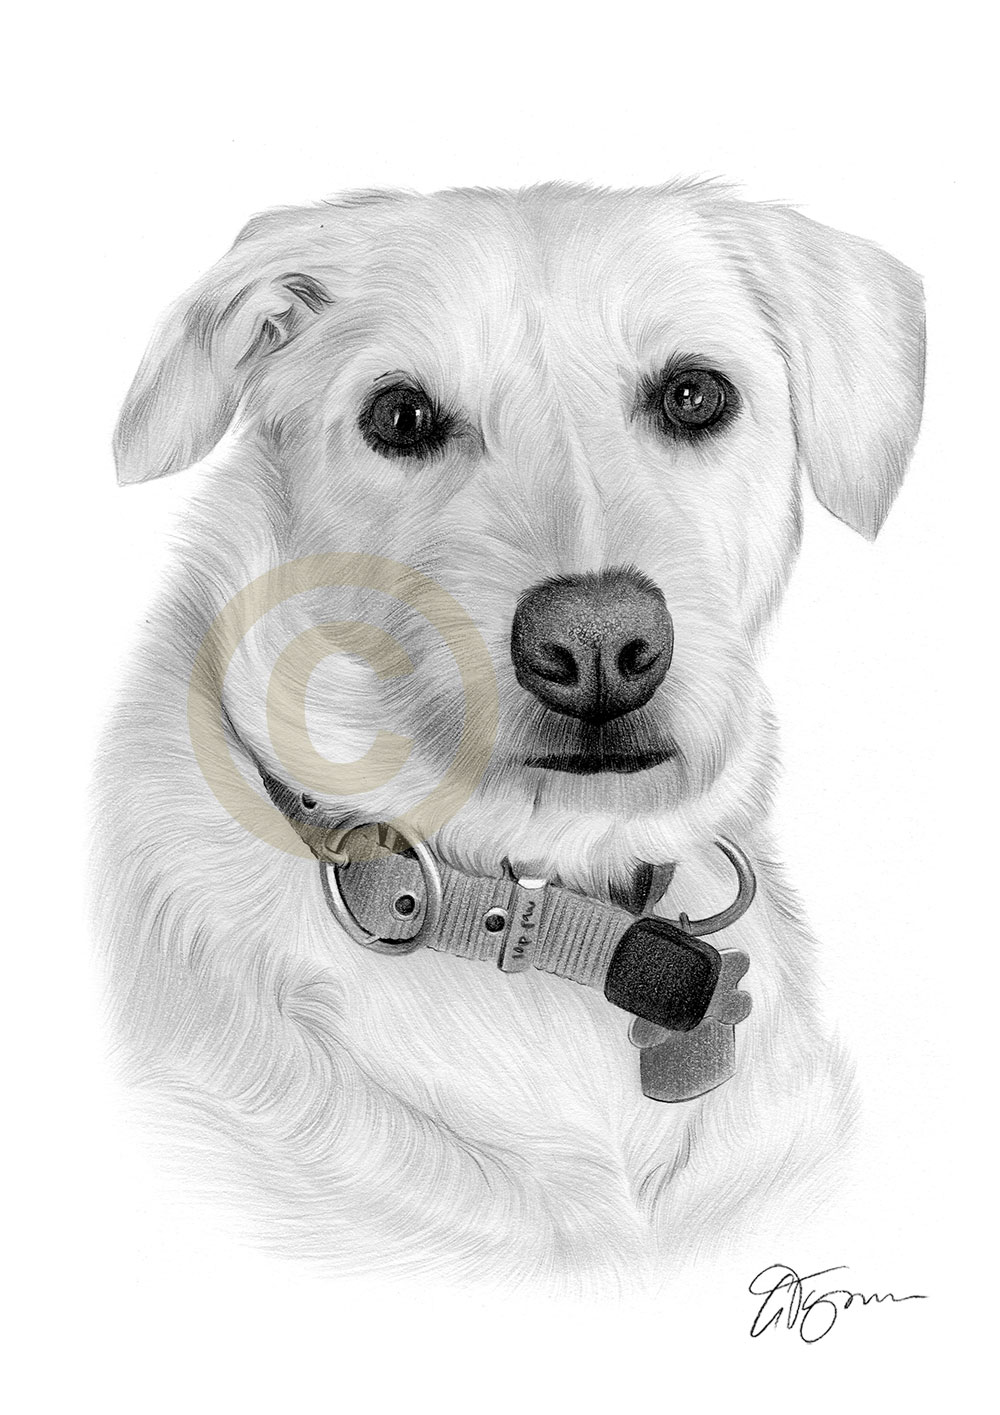 Pencil drawing commission of a labrador called Nala by artist Gary Tymon